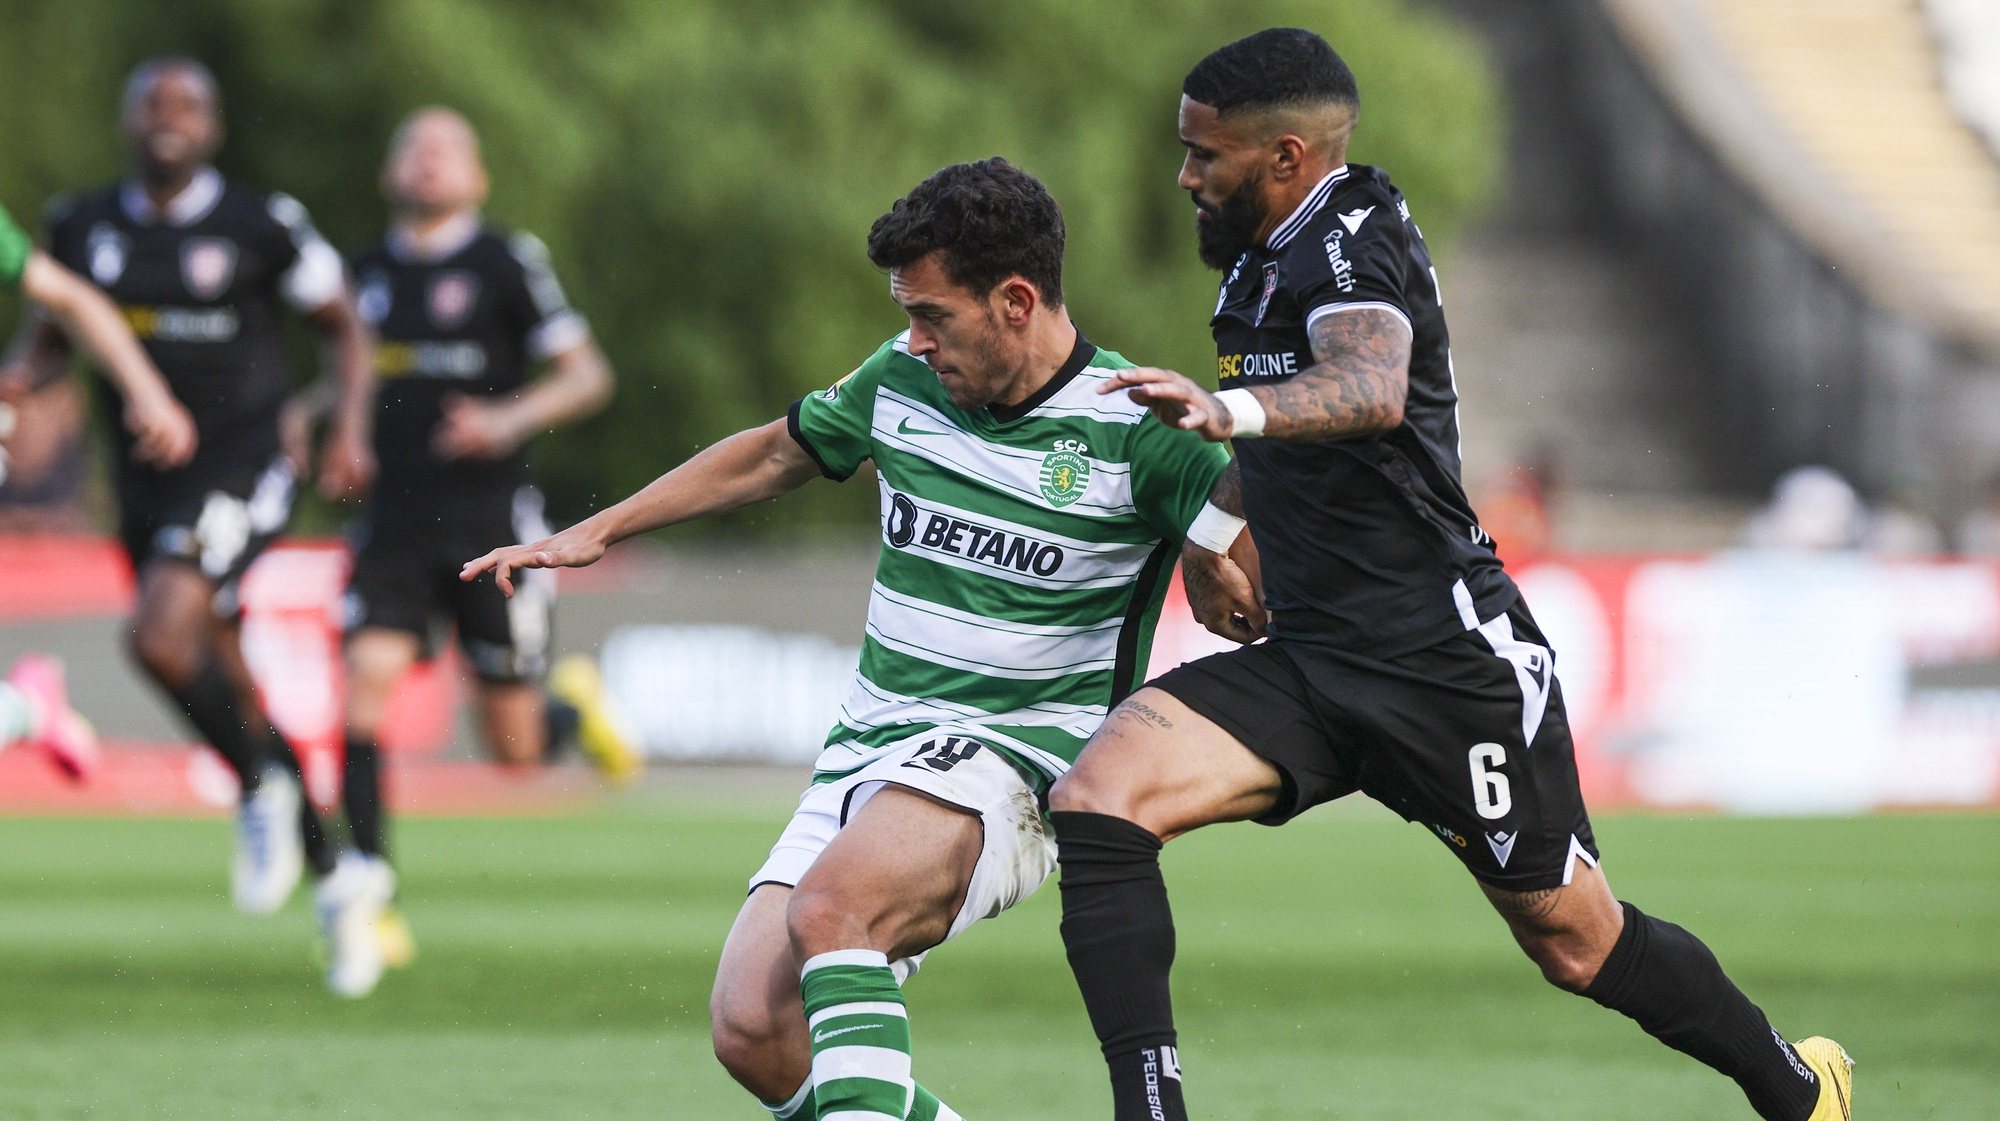 Casa Pia AC player Derick Poloni (R) in action against Sporting CP player Pedro Goncalves (L), during the Portuguese First League soccer match, between Casa Pia AC vs Sporting CP, at Jamor stadium in Oeiras, Portugal, 09 April 2023. MIGUEL A. LOPES/LUSA